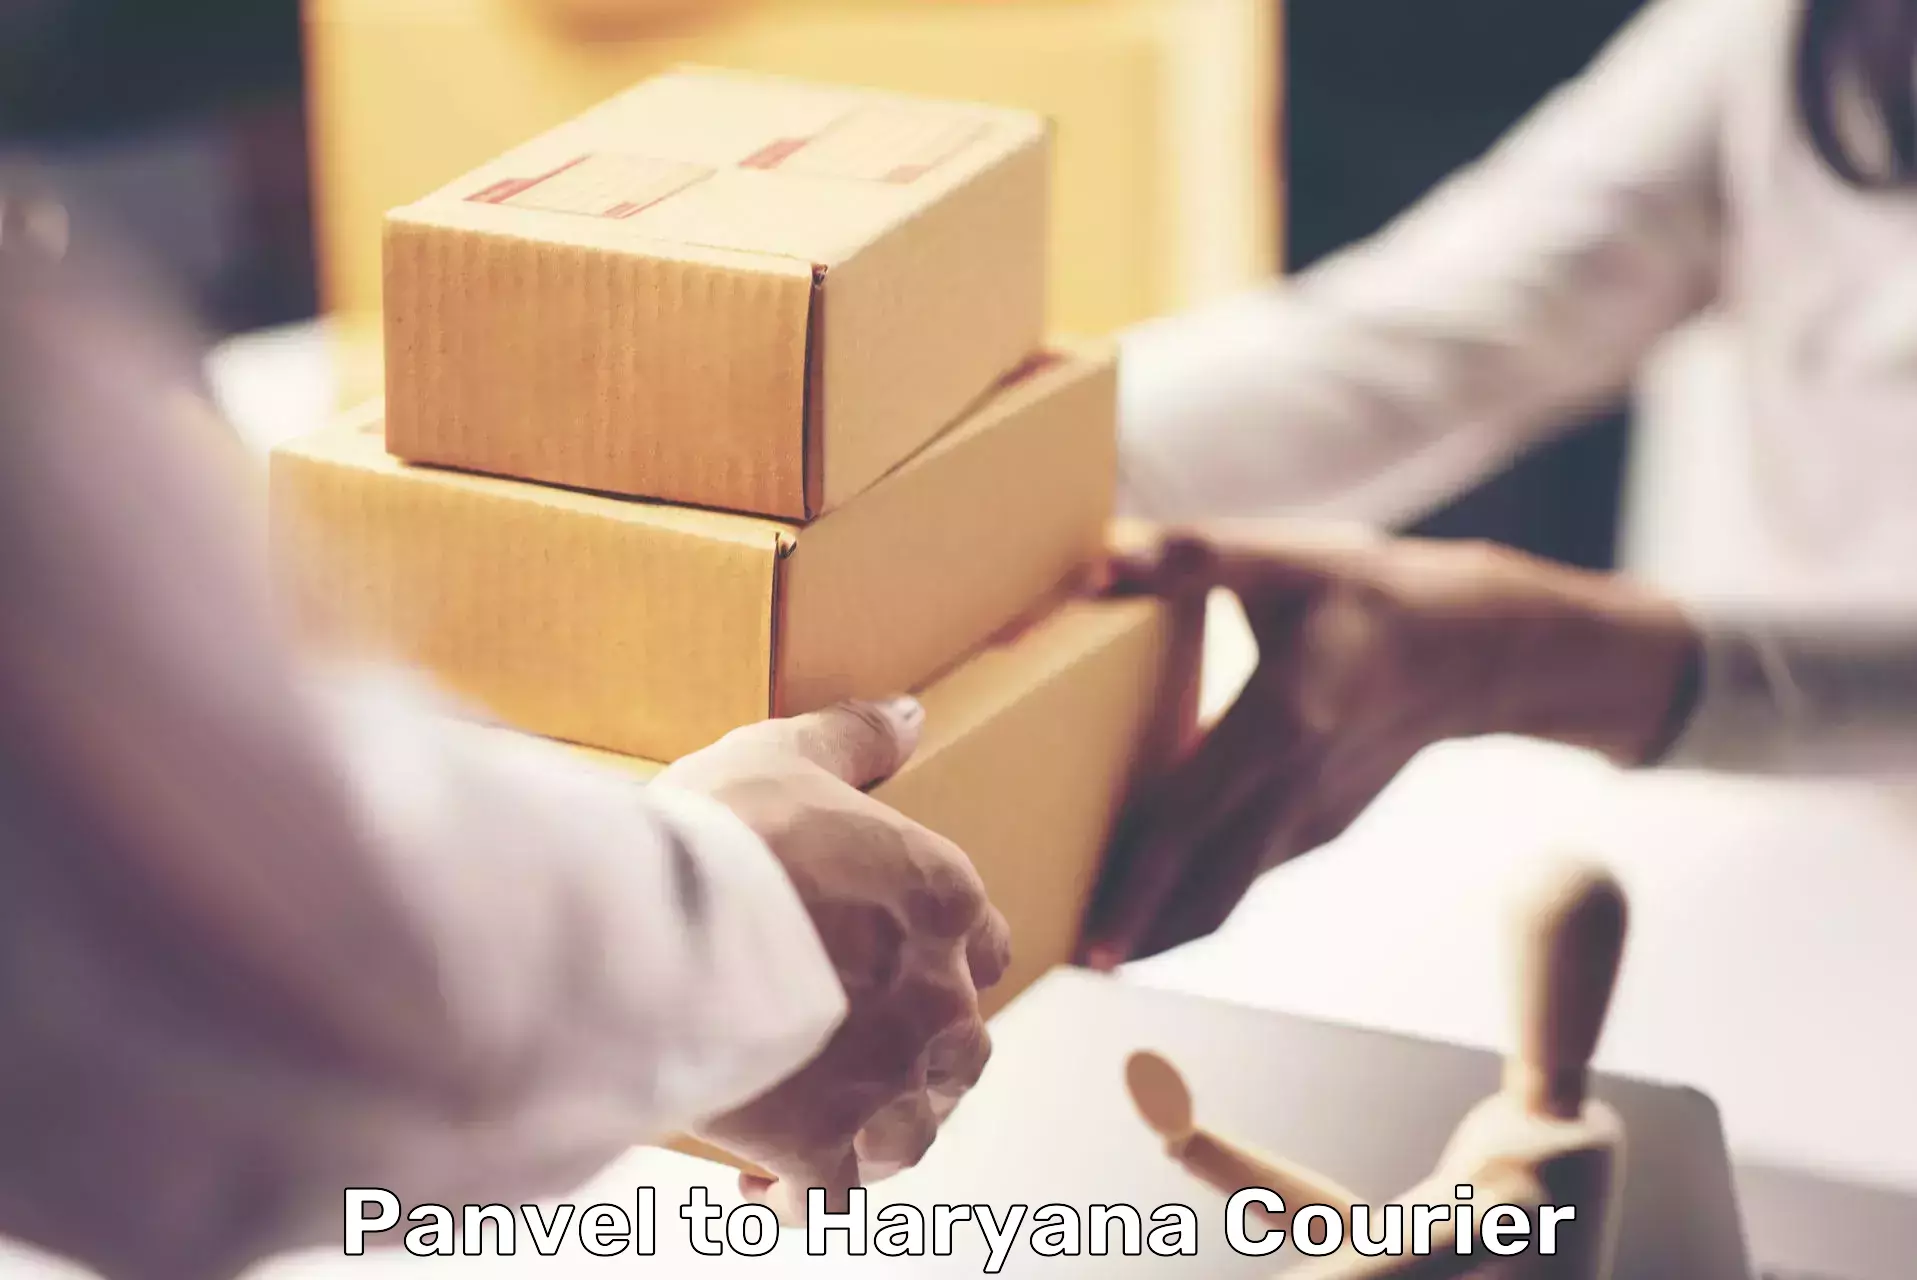 Business delivery service Panvel to Chirya